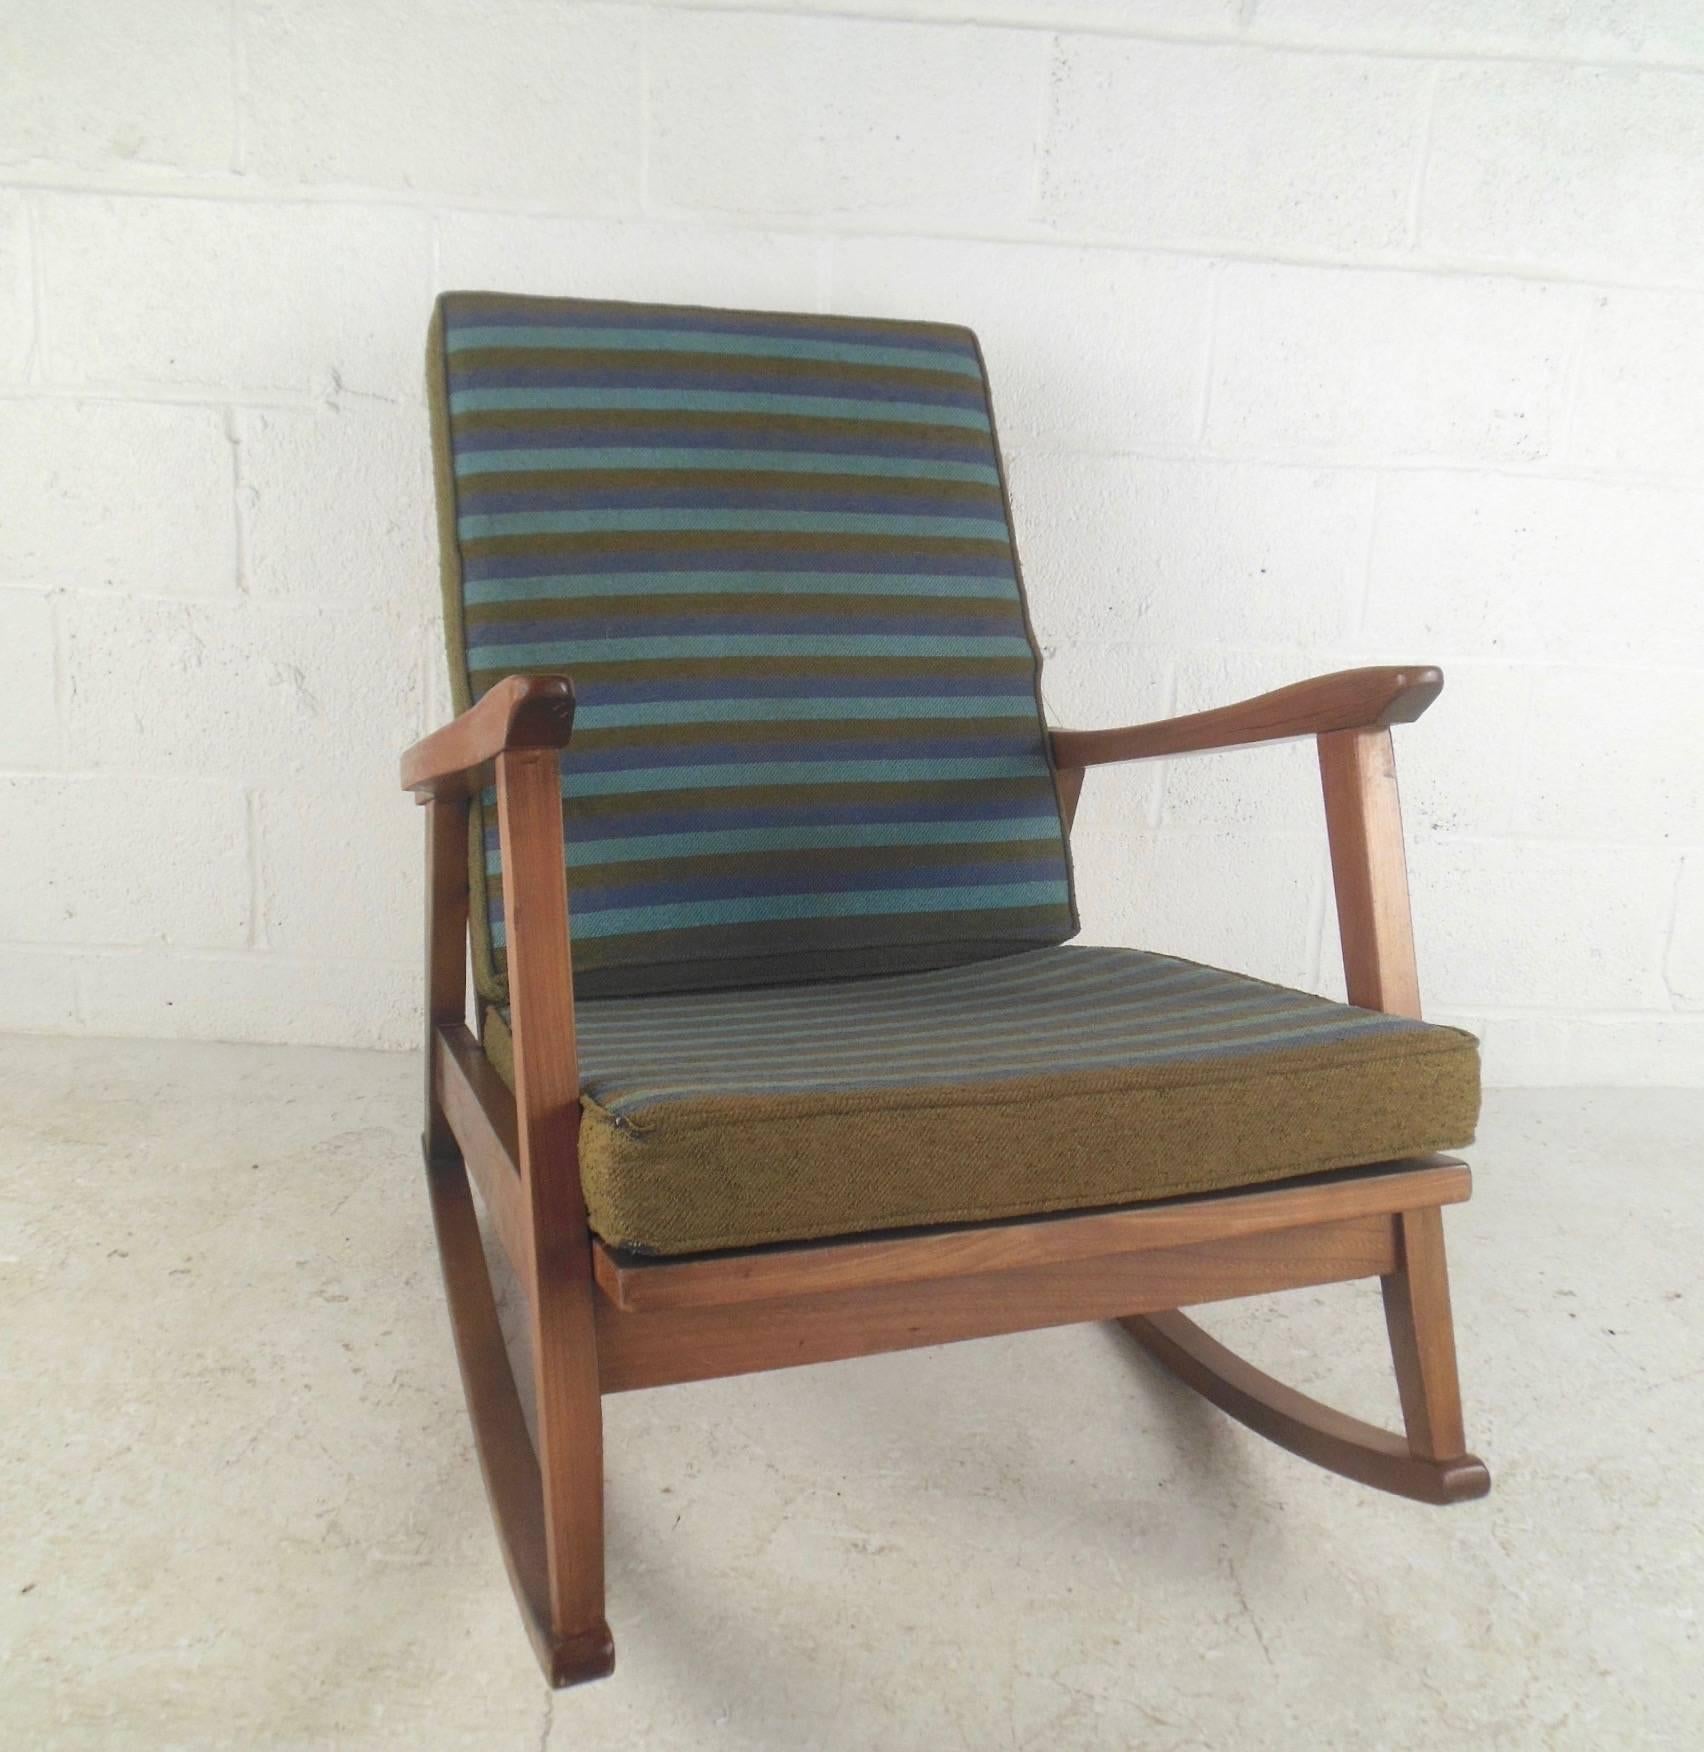 This stunning vintage modern rocking chair features Classic Mid-century design and Pairs American walnut construction with striped vintage fabric. Great rocking chair for any setting, please confirm item location (NY or NJ).